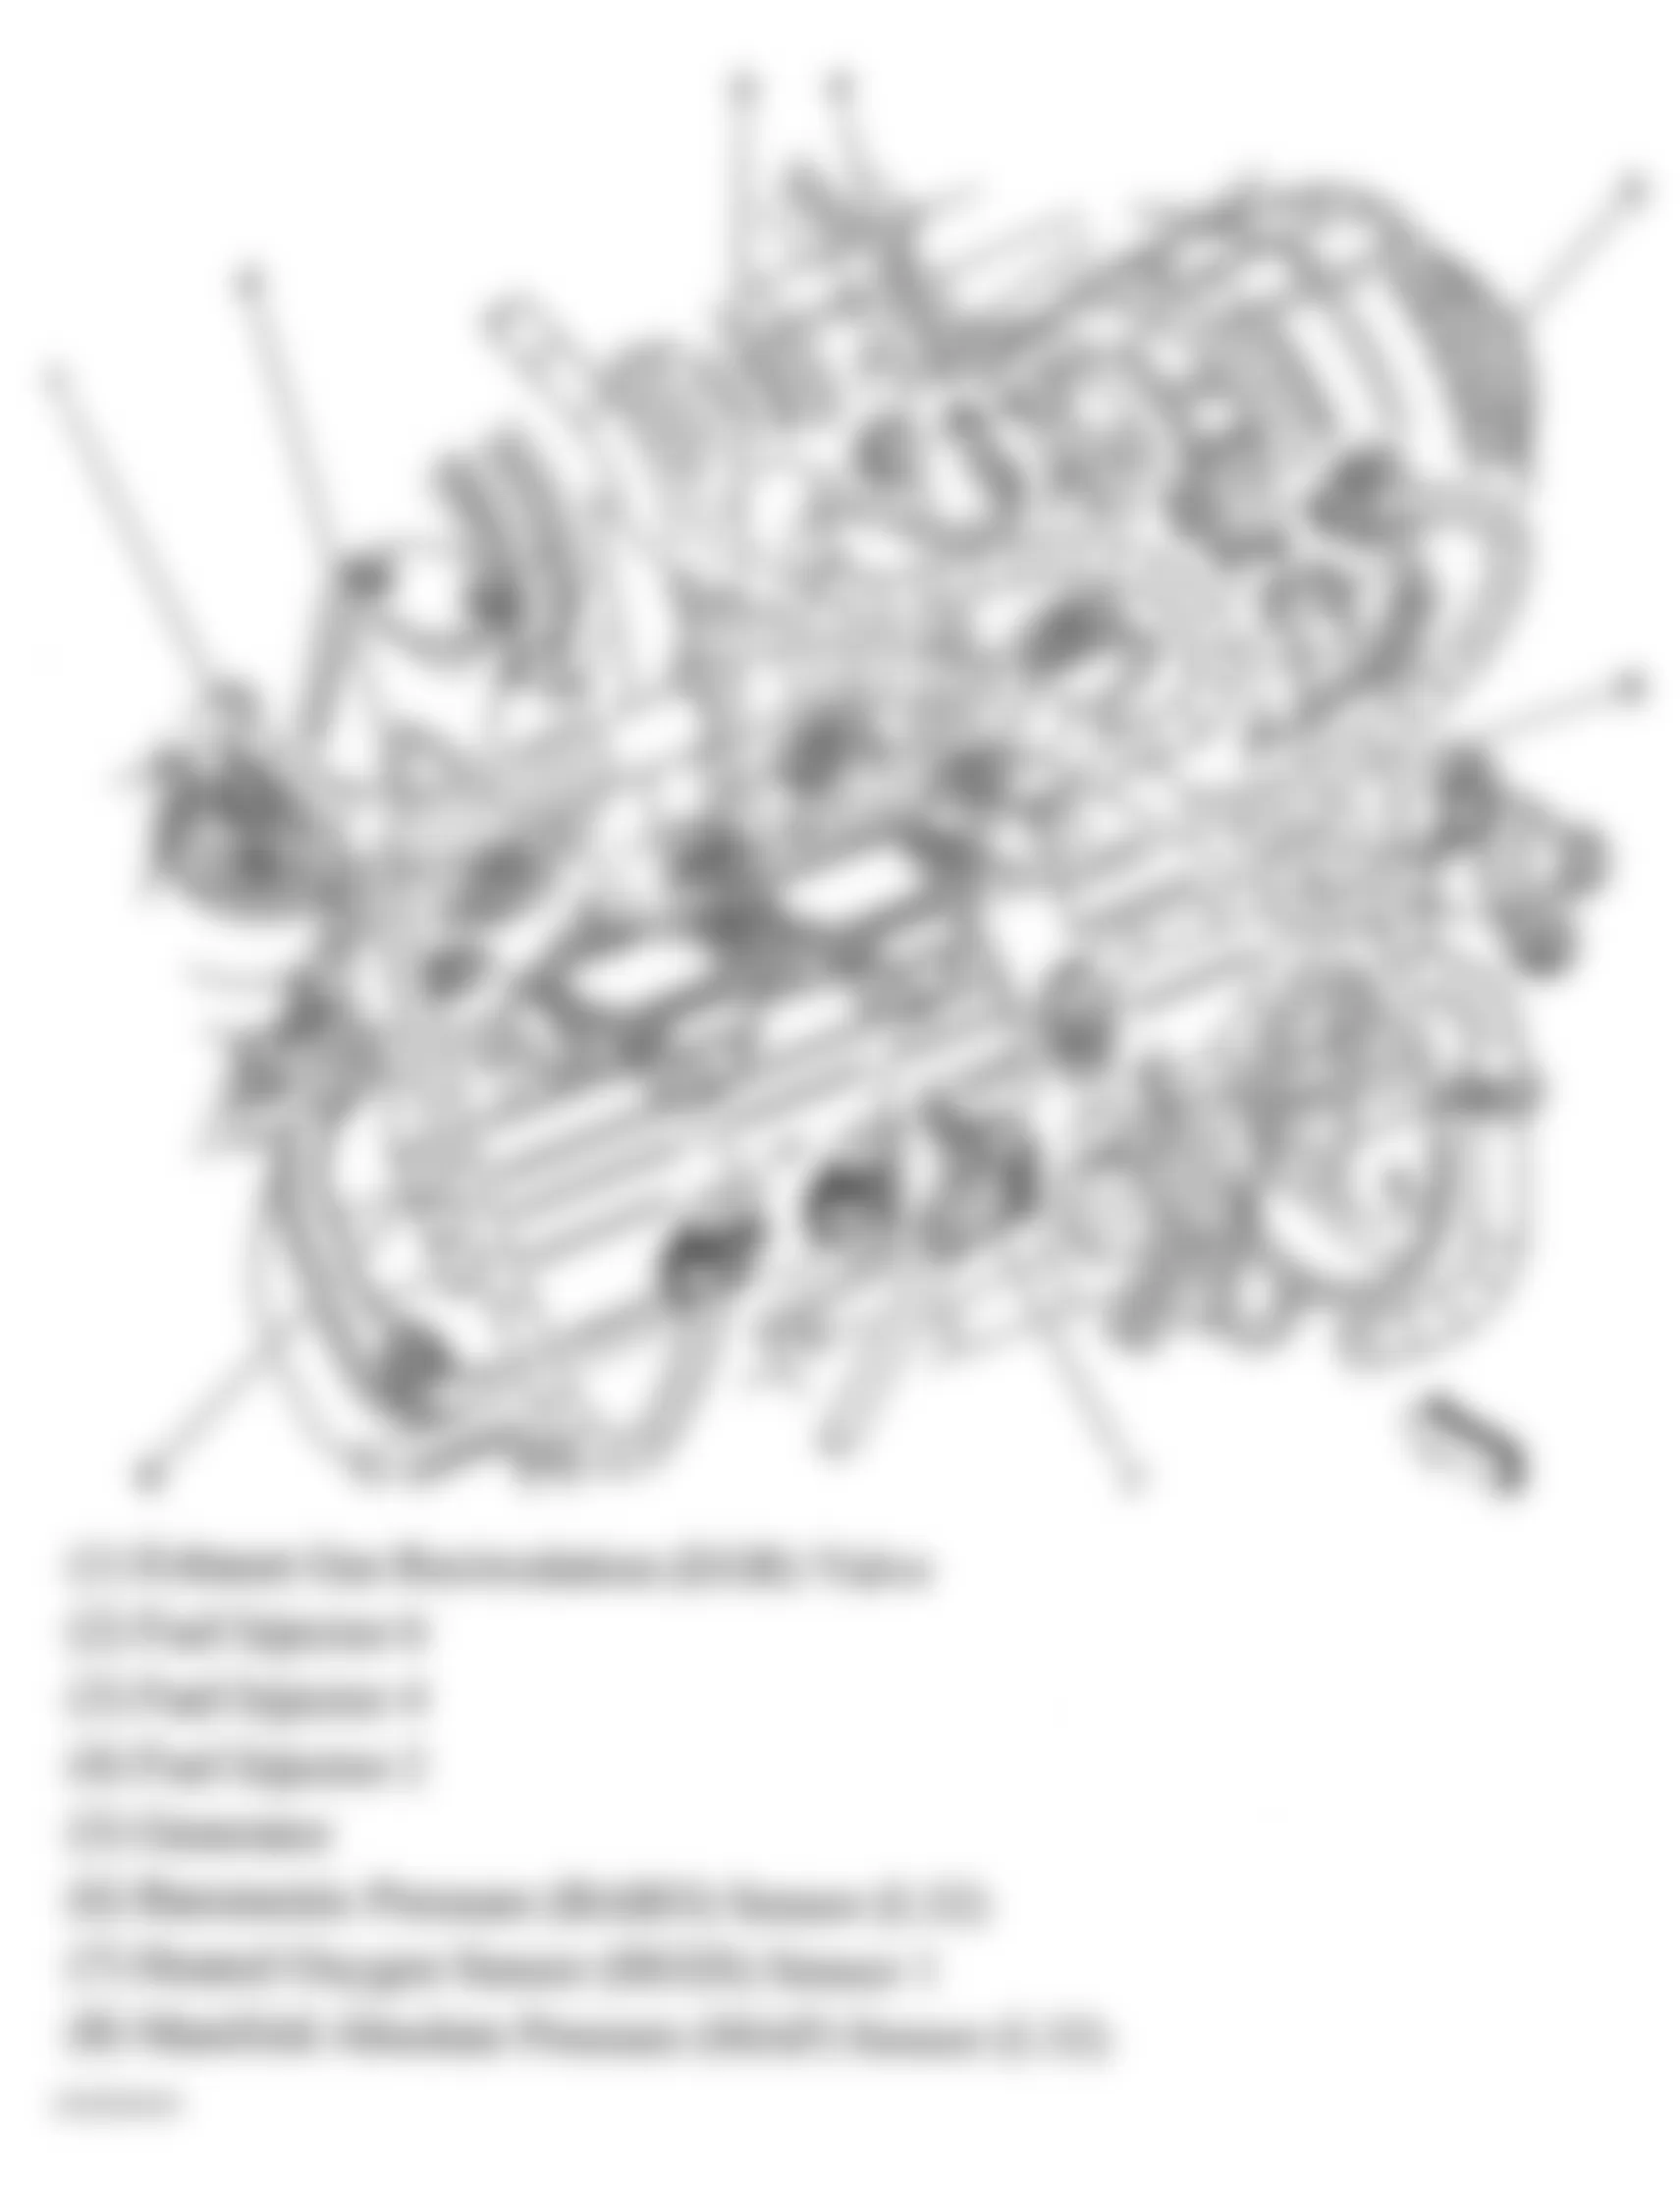 Buick LaCrosse CXS 2005 - Component Locations -  Left Rear Of Engine (3.8L)